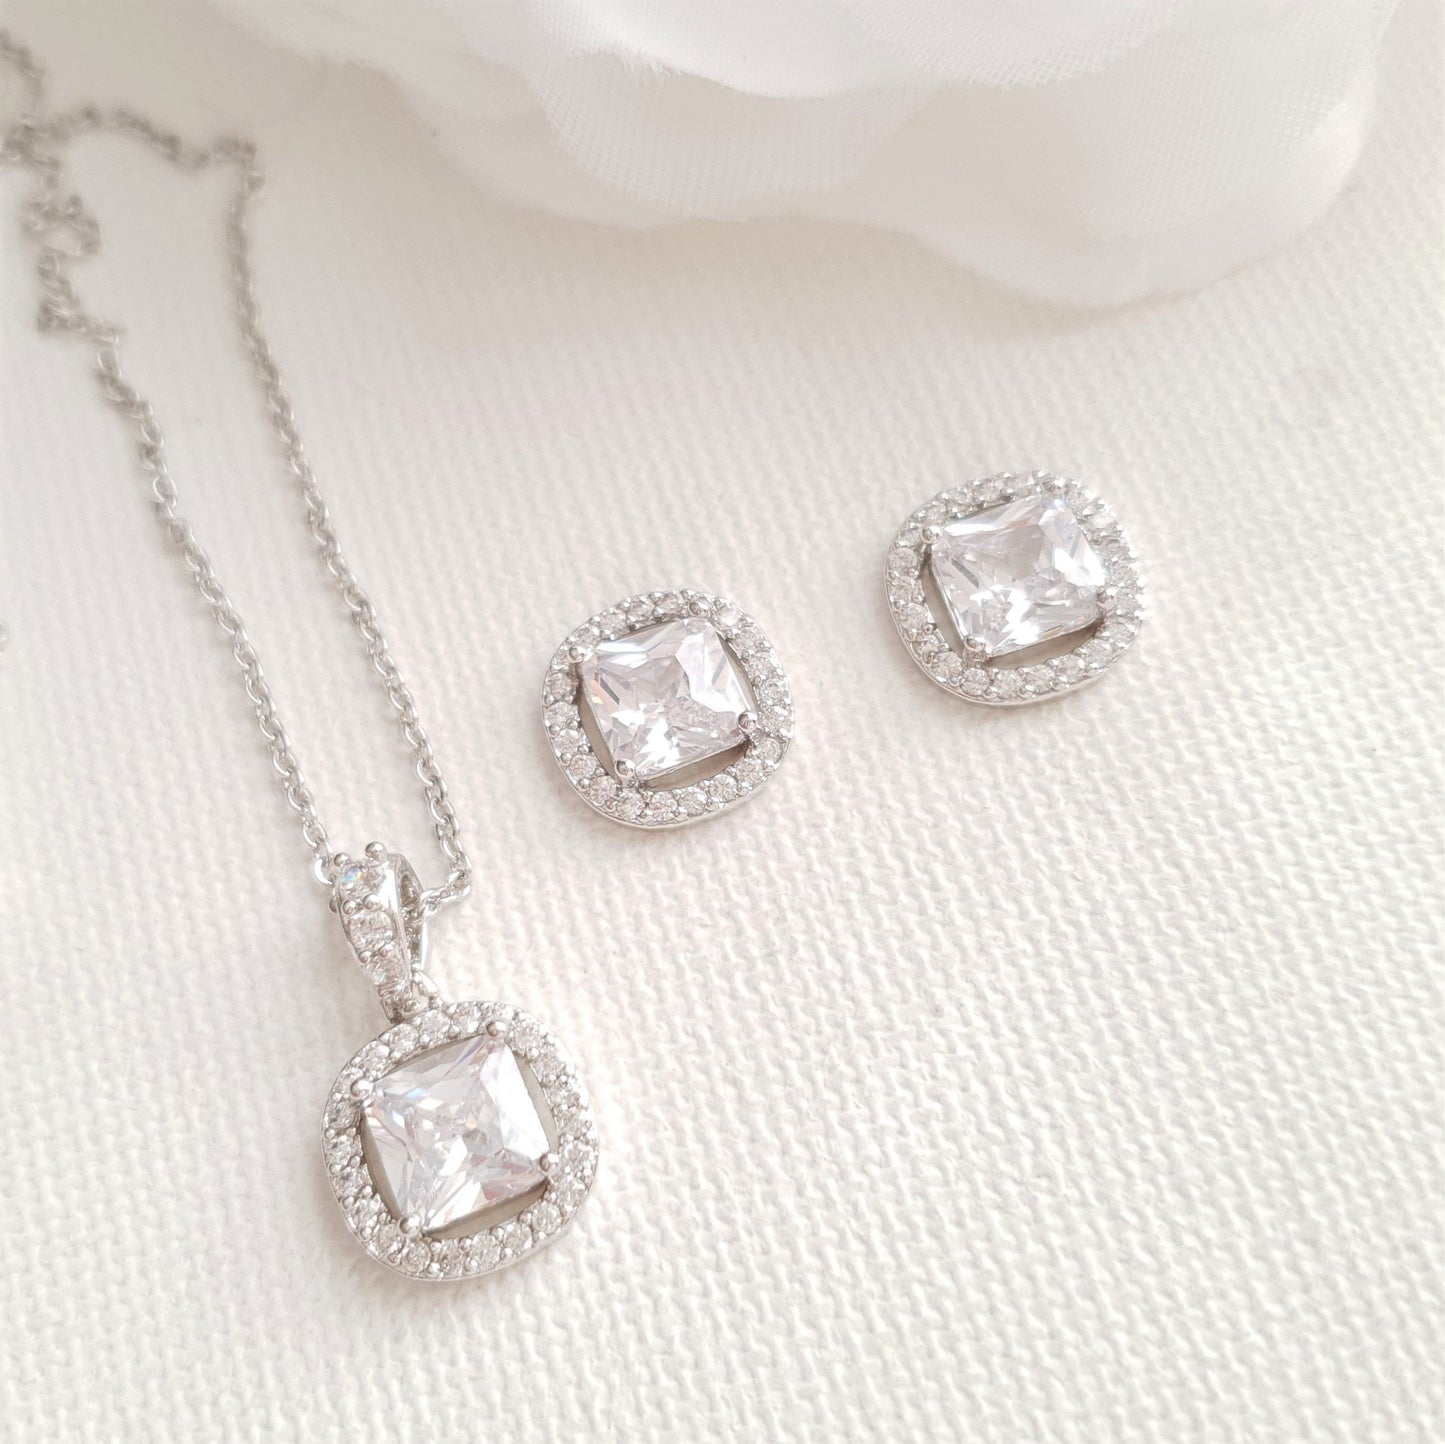 Earrings and Necklace Bridesmaids Jewelry Set-Piper